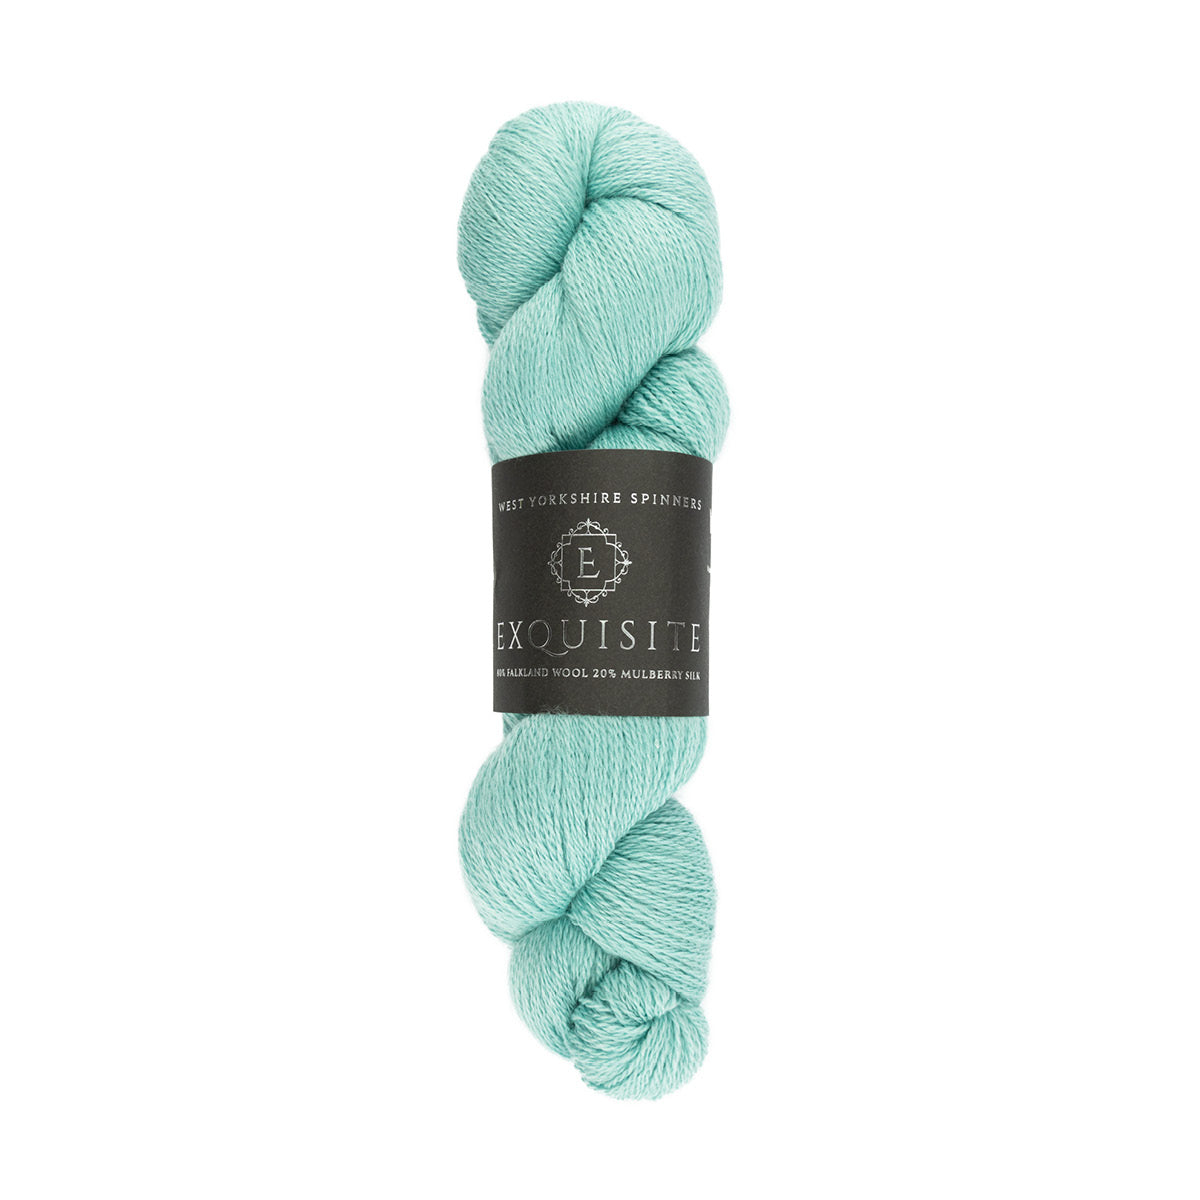 WYS West Yorkshire Spinners Exquisite Lace hank or skein in light mint green shade viscount 337